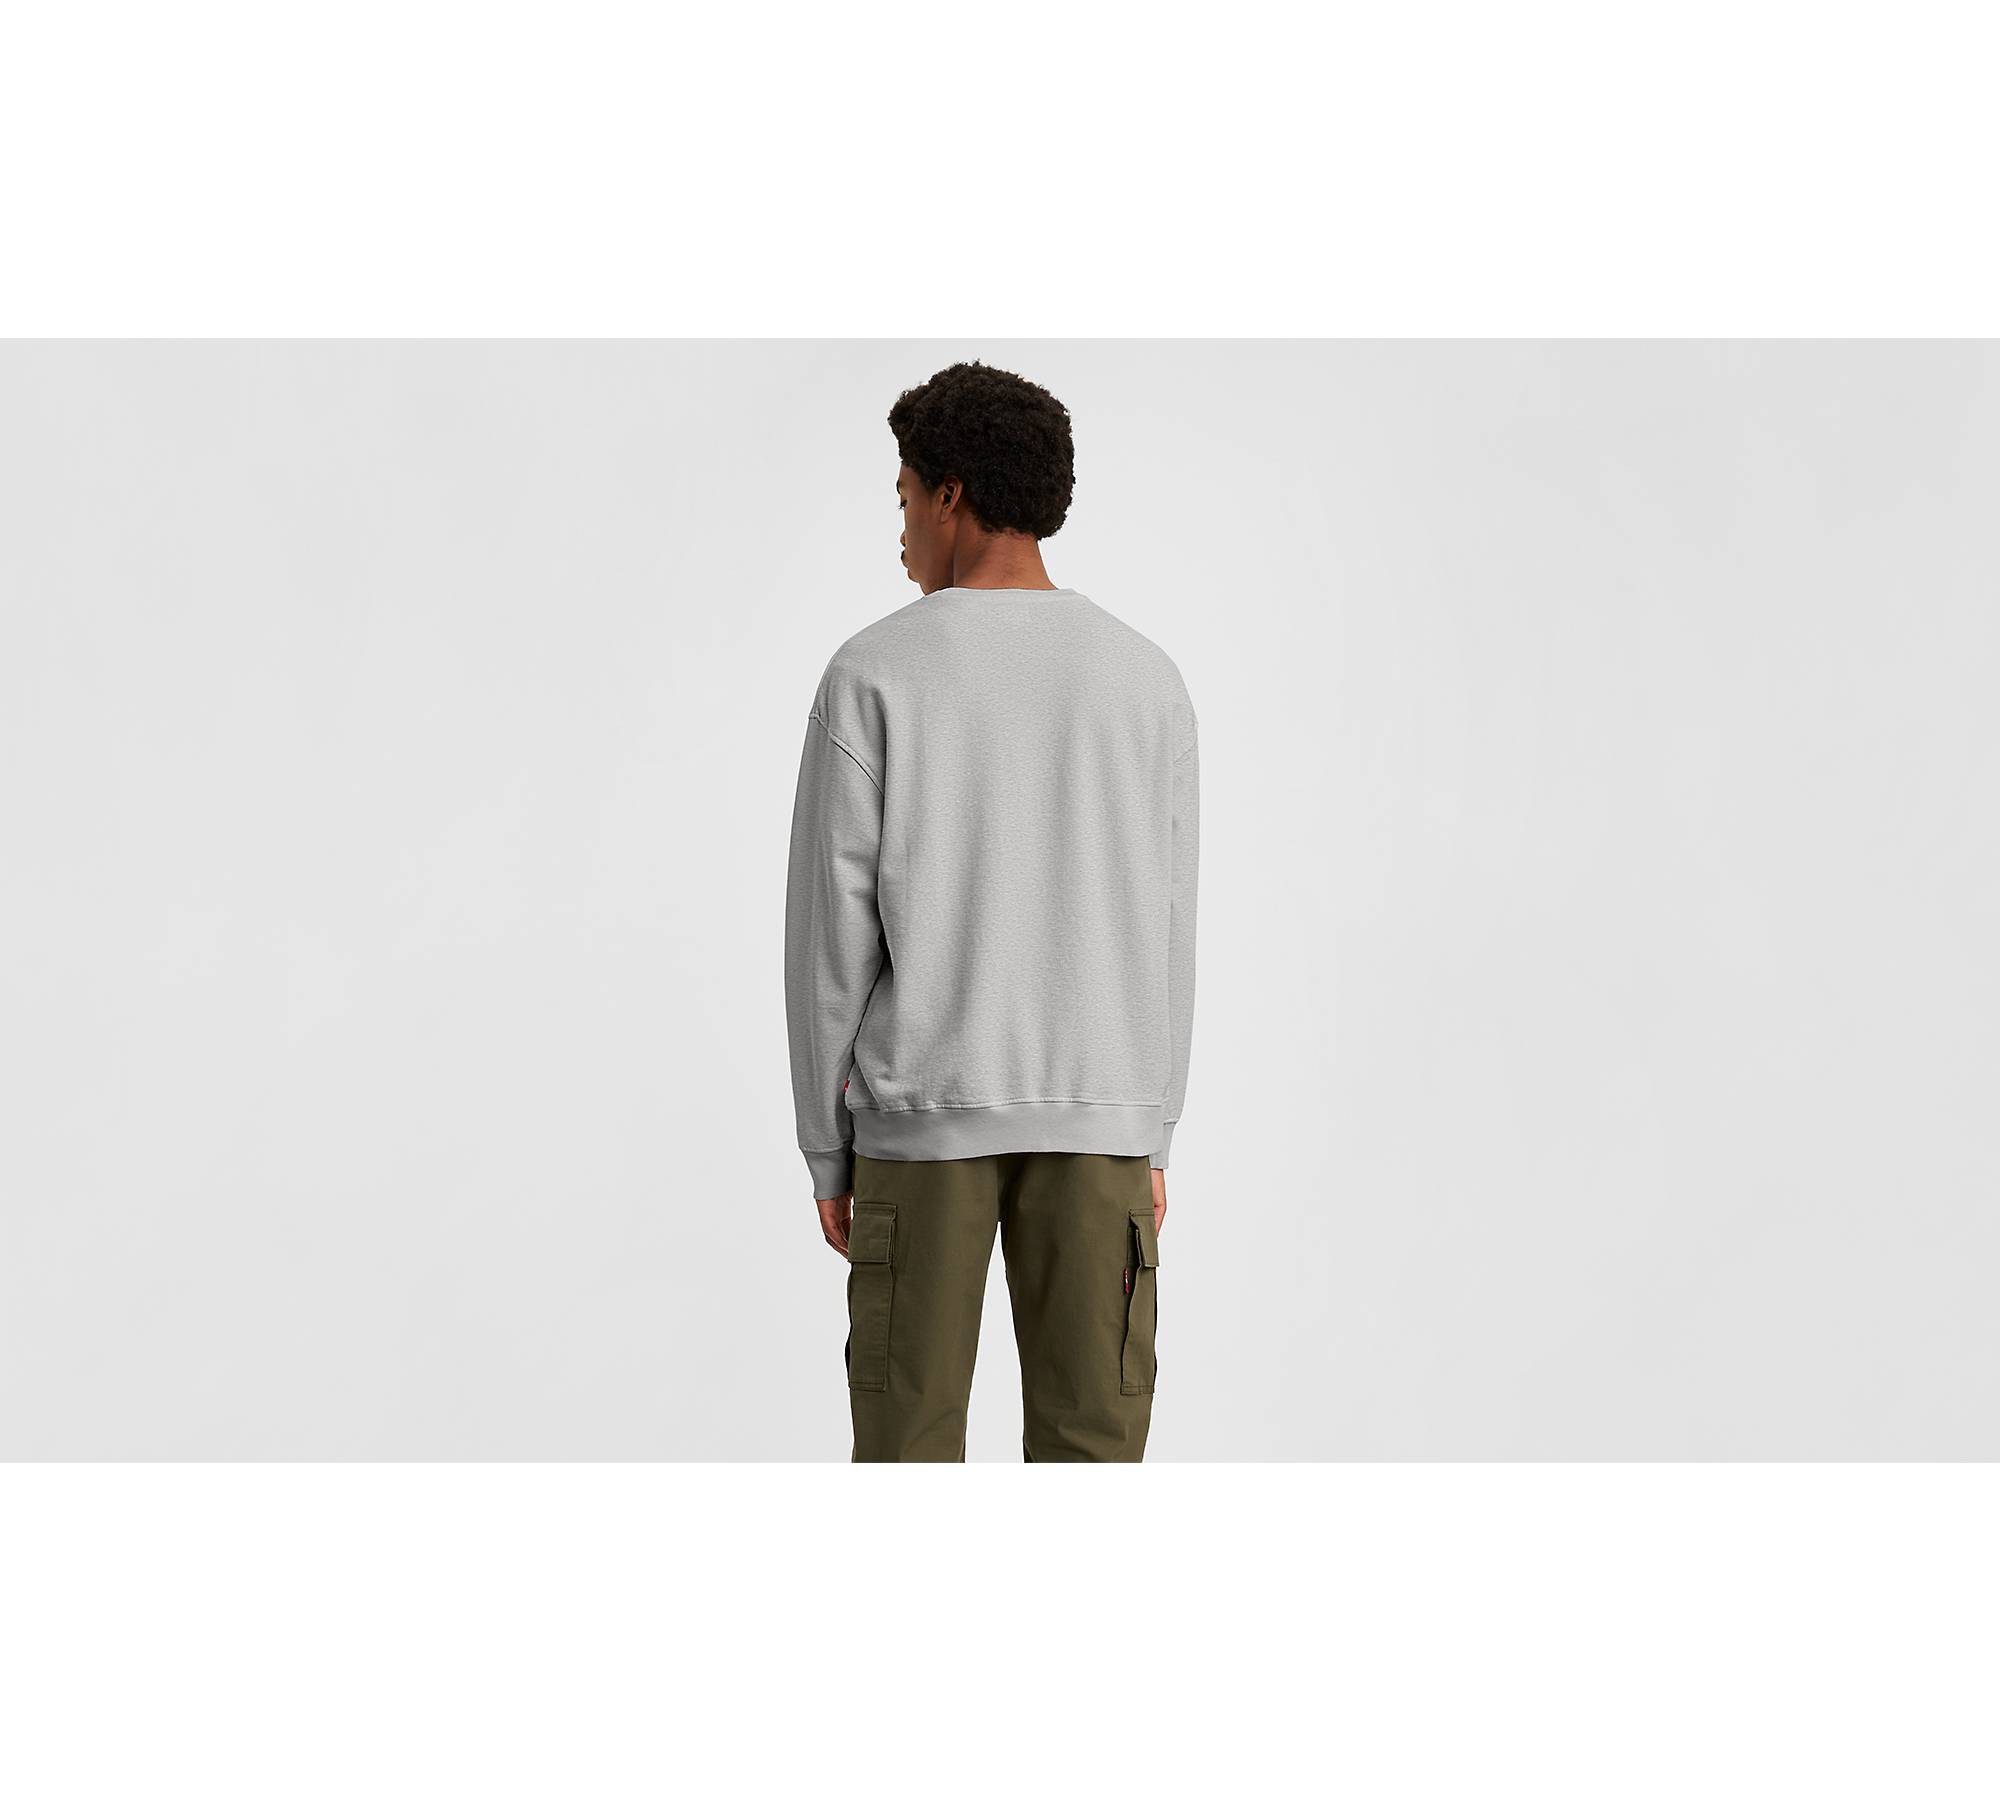 Relaxed Graphic Crewneck - Multi-color | Levi's® US